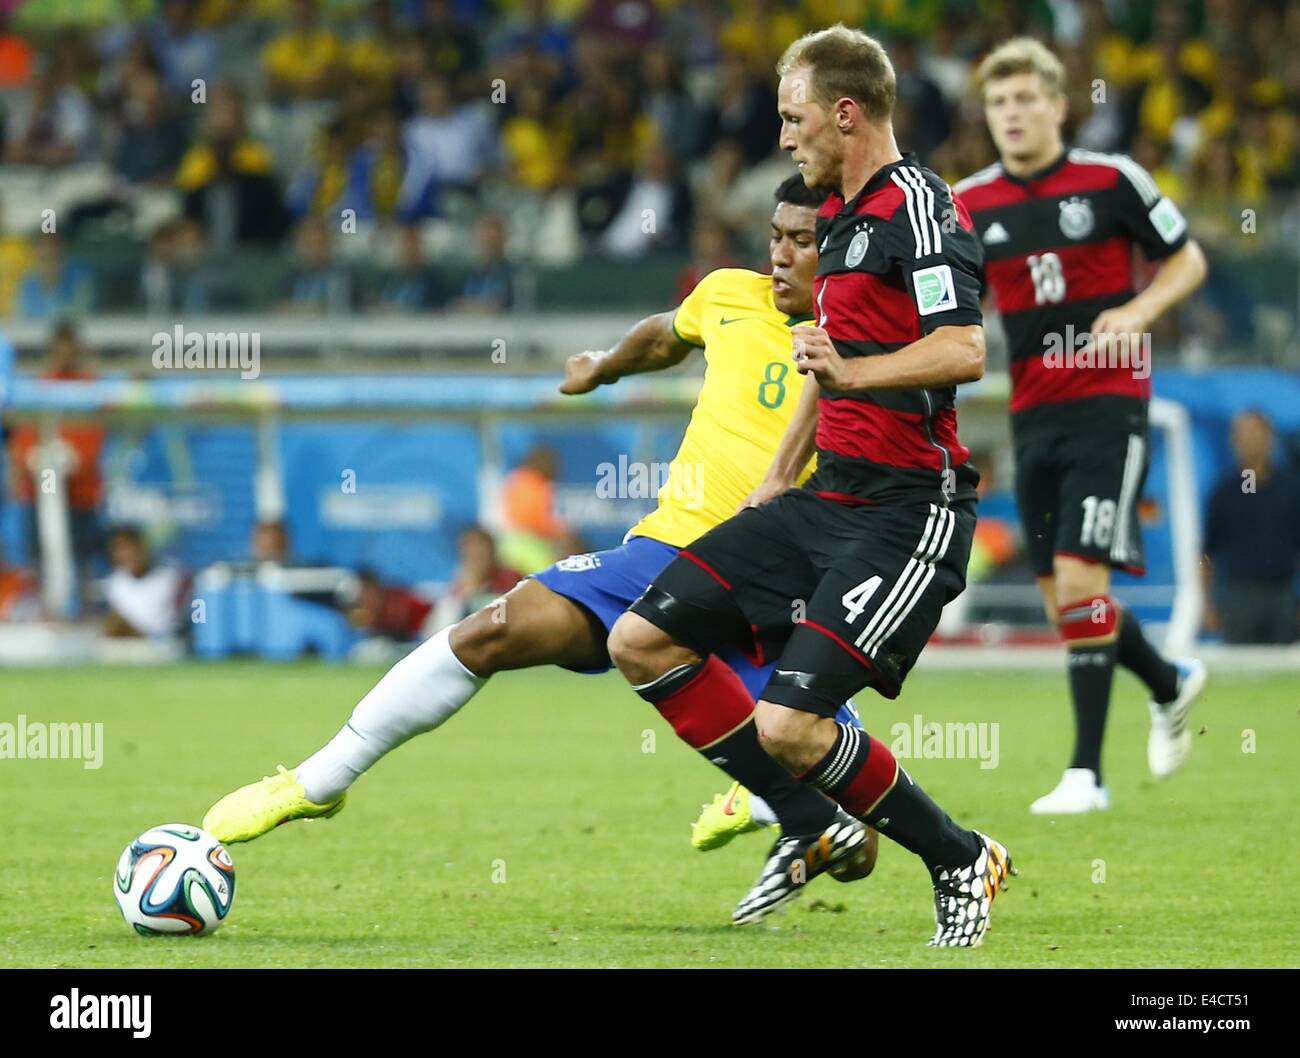 Belo Horizonte, Brazil. 8th July, 2014. Brazil's Paulinho vies with Germany's Benedikt Howedes during a semifinal match between Brazil and Germany of 2014 FIFA World Cup at the Estadio Mineirao Stadium in Belo Horizonte, Brazil, on July 8, 2014. Credit:  Chen Jianli/Xinhua/Alamy Live News Stock Photo